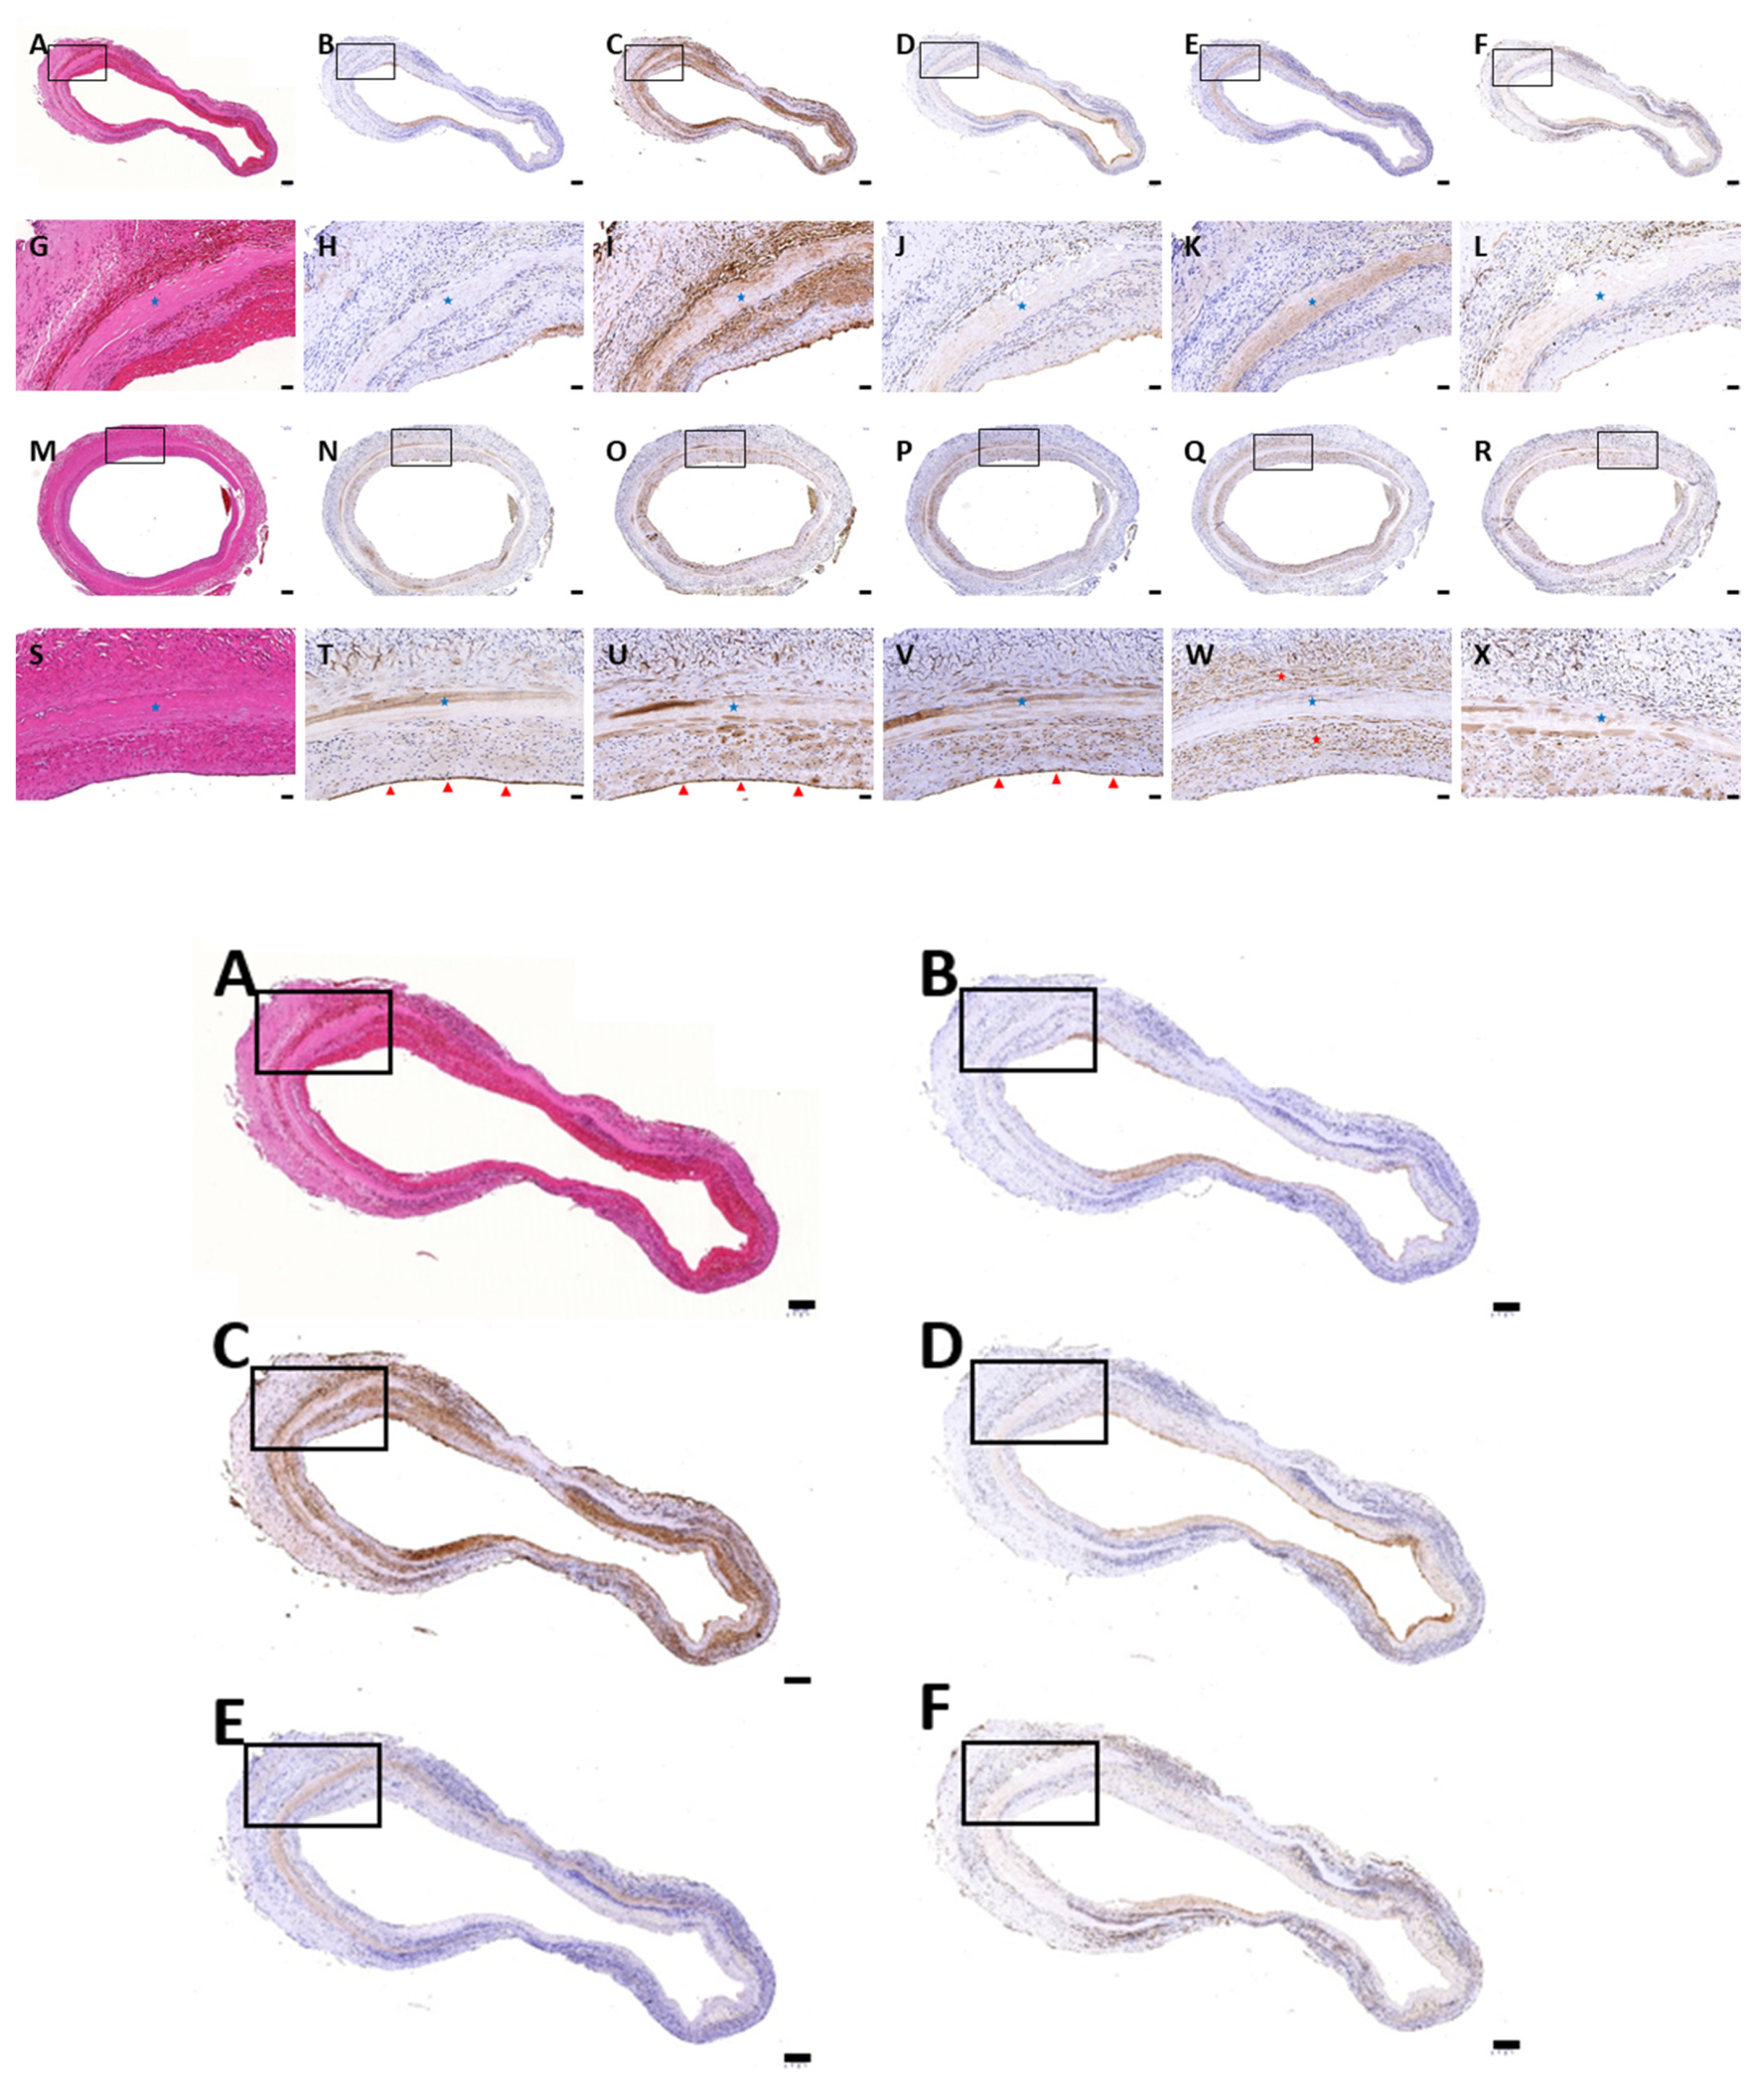 Polymers Free Full Text Sonication Assisted Method For Decellularization Of Human Umbilical Artery For Small Caliber Vascular Tissue Engineering Html